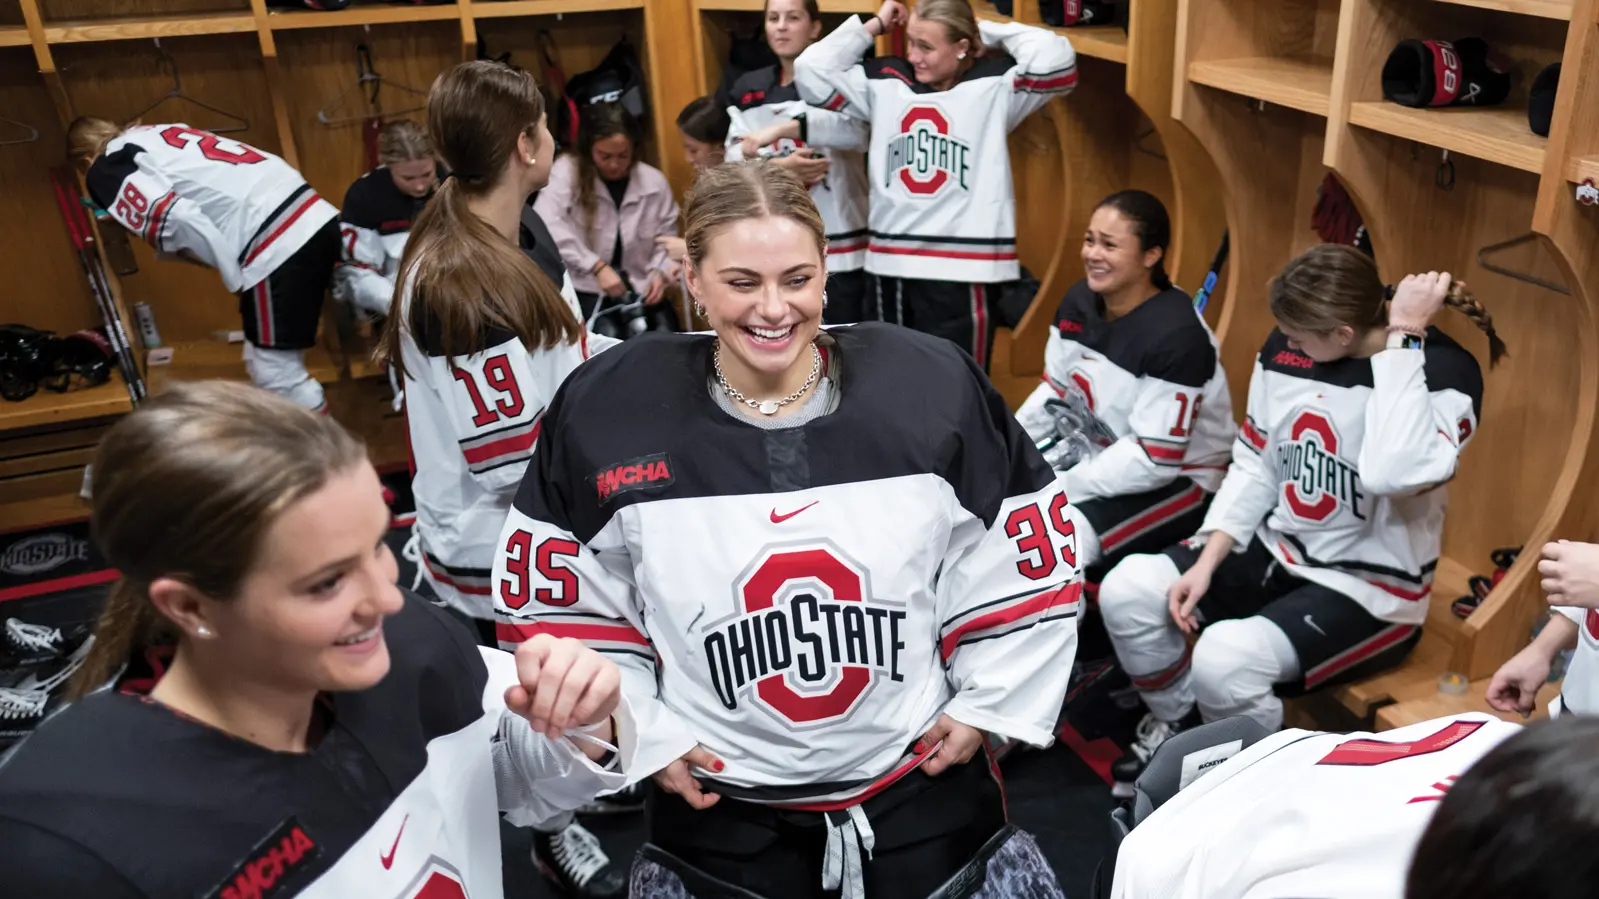 In a crowded locker room, young women in ponytails and Ohio State hockey uniforms laugh and talk in groups.